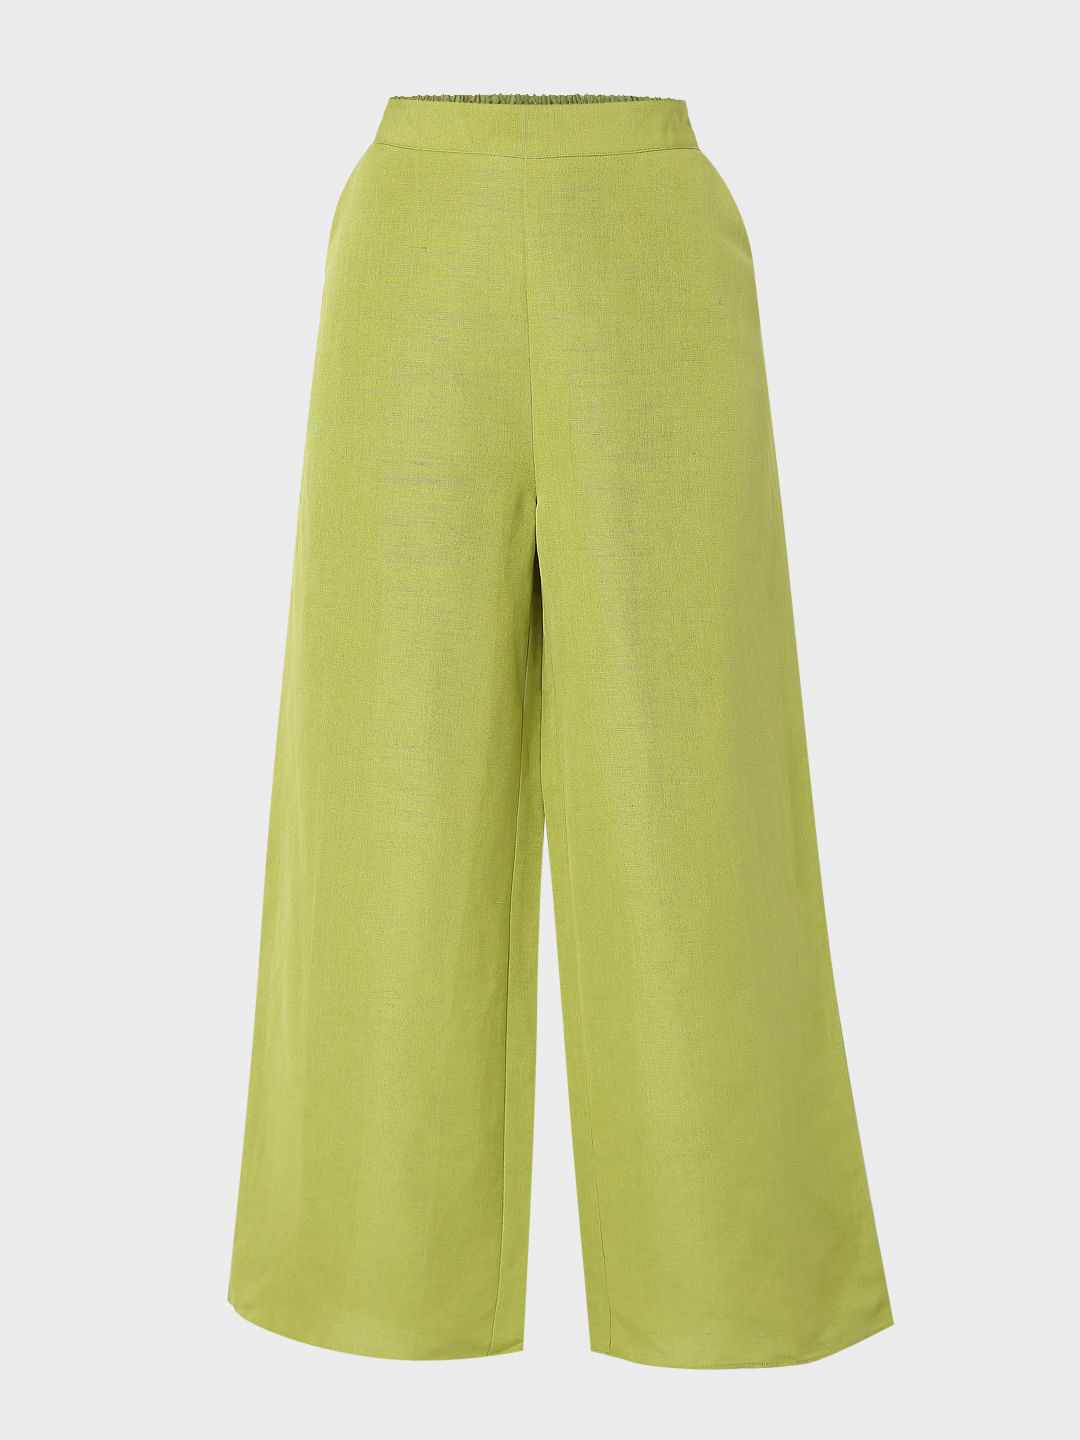 Jdy Soft Ribbed Flared Trousers Coord in Green  Lyst Canada